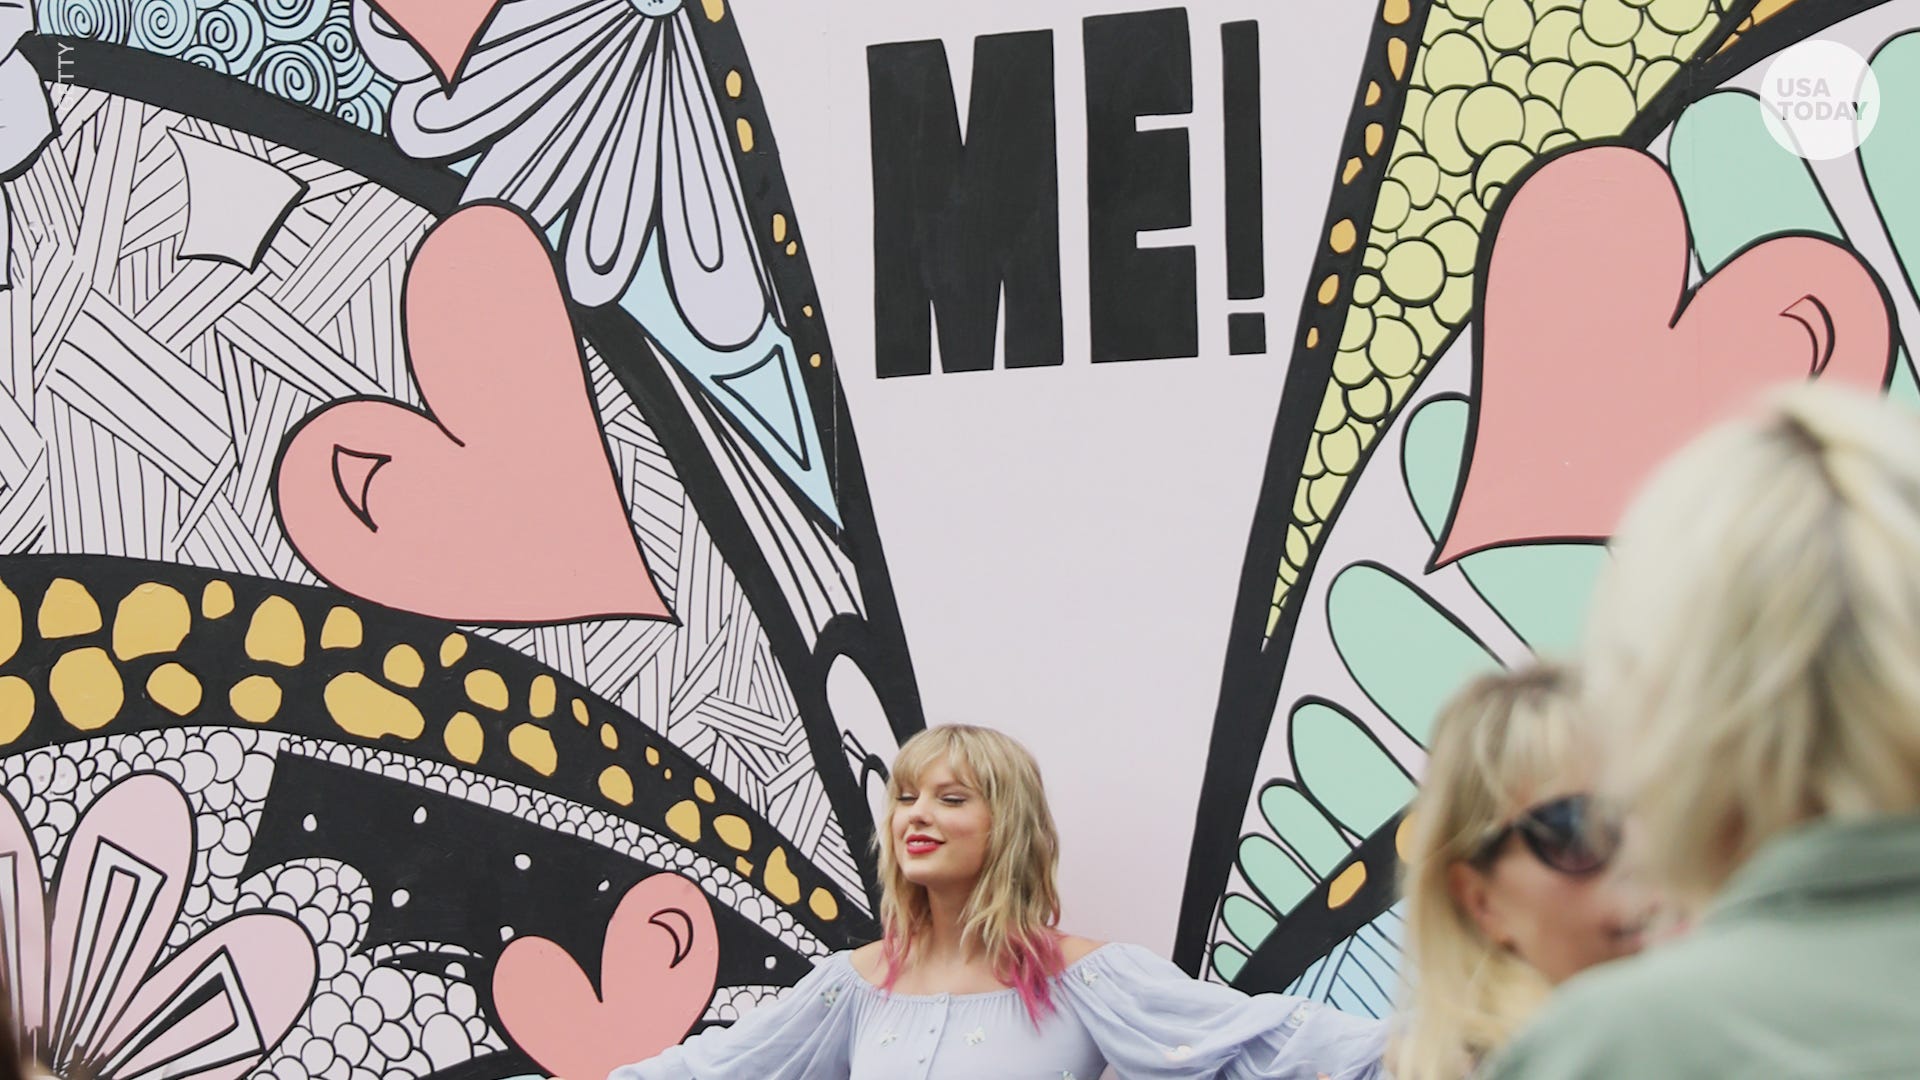 Taylor Swift S Me Video All Easter Eggs You May Have Missed